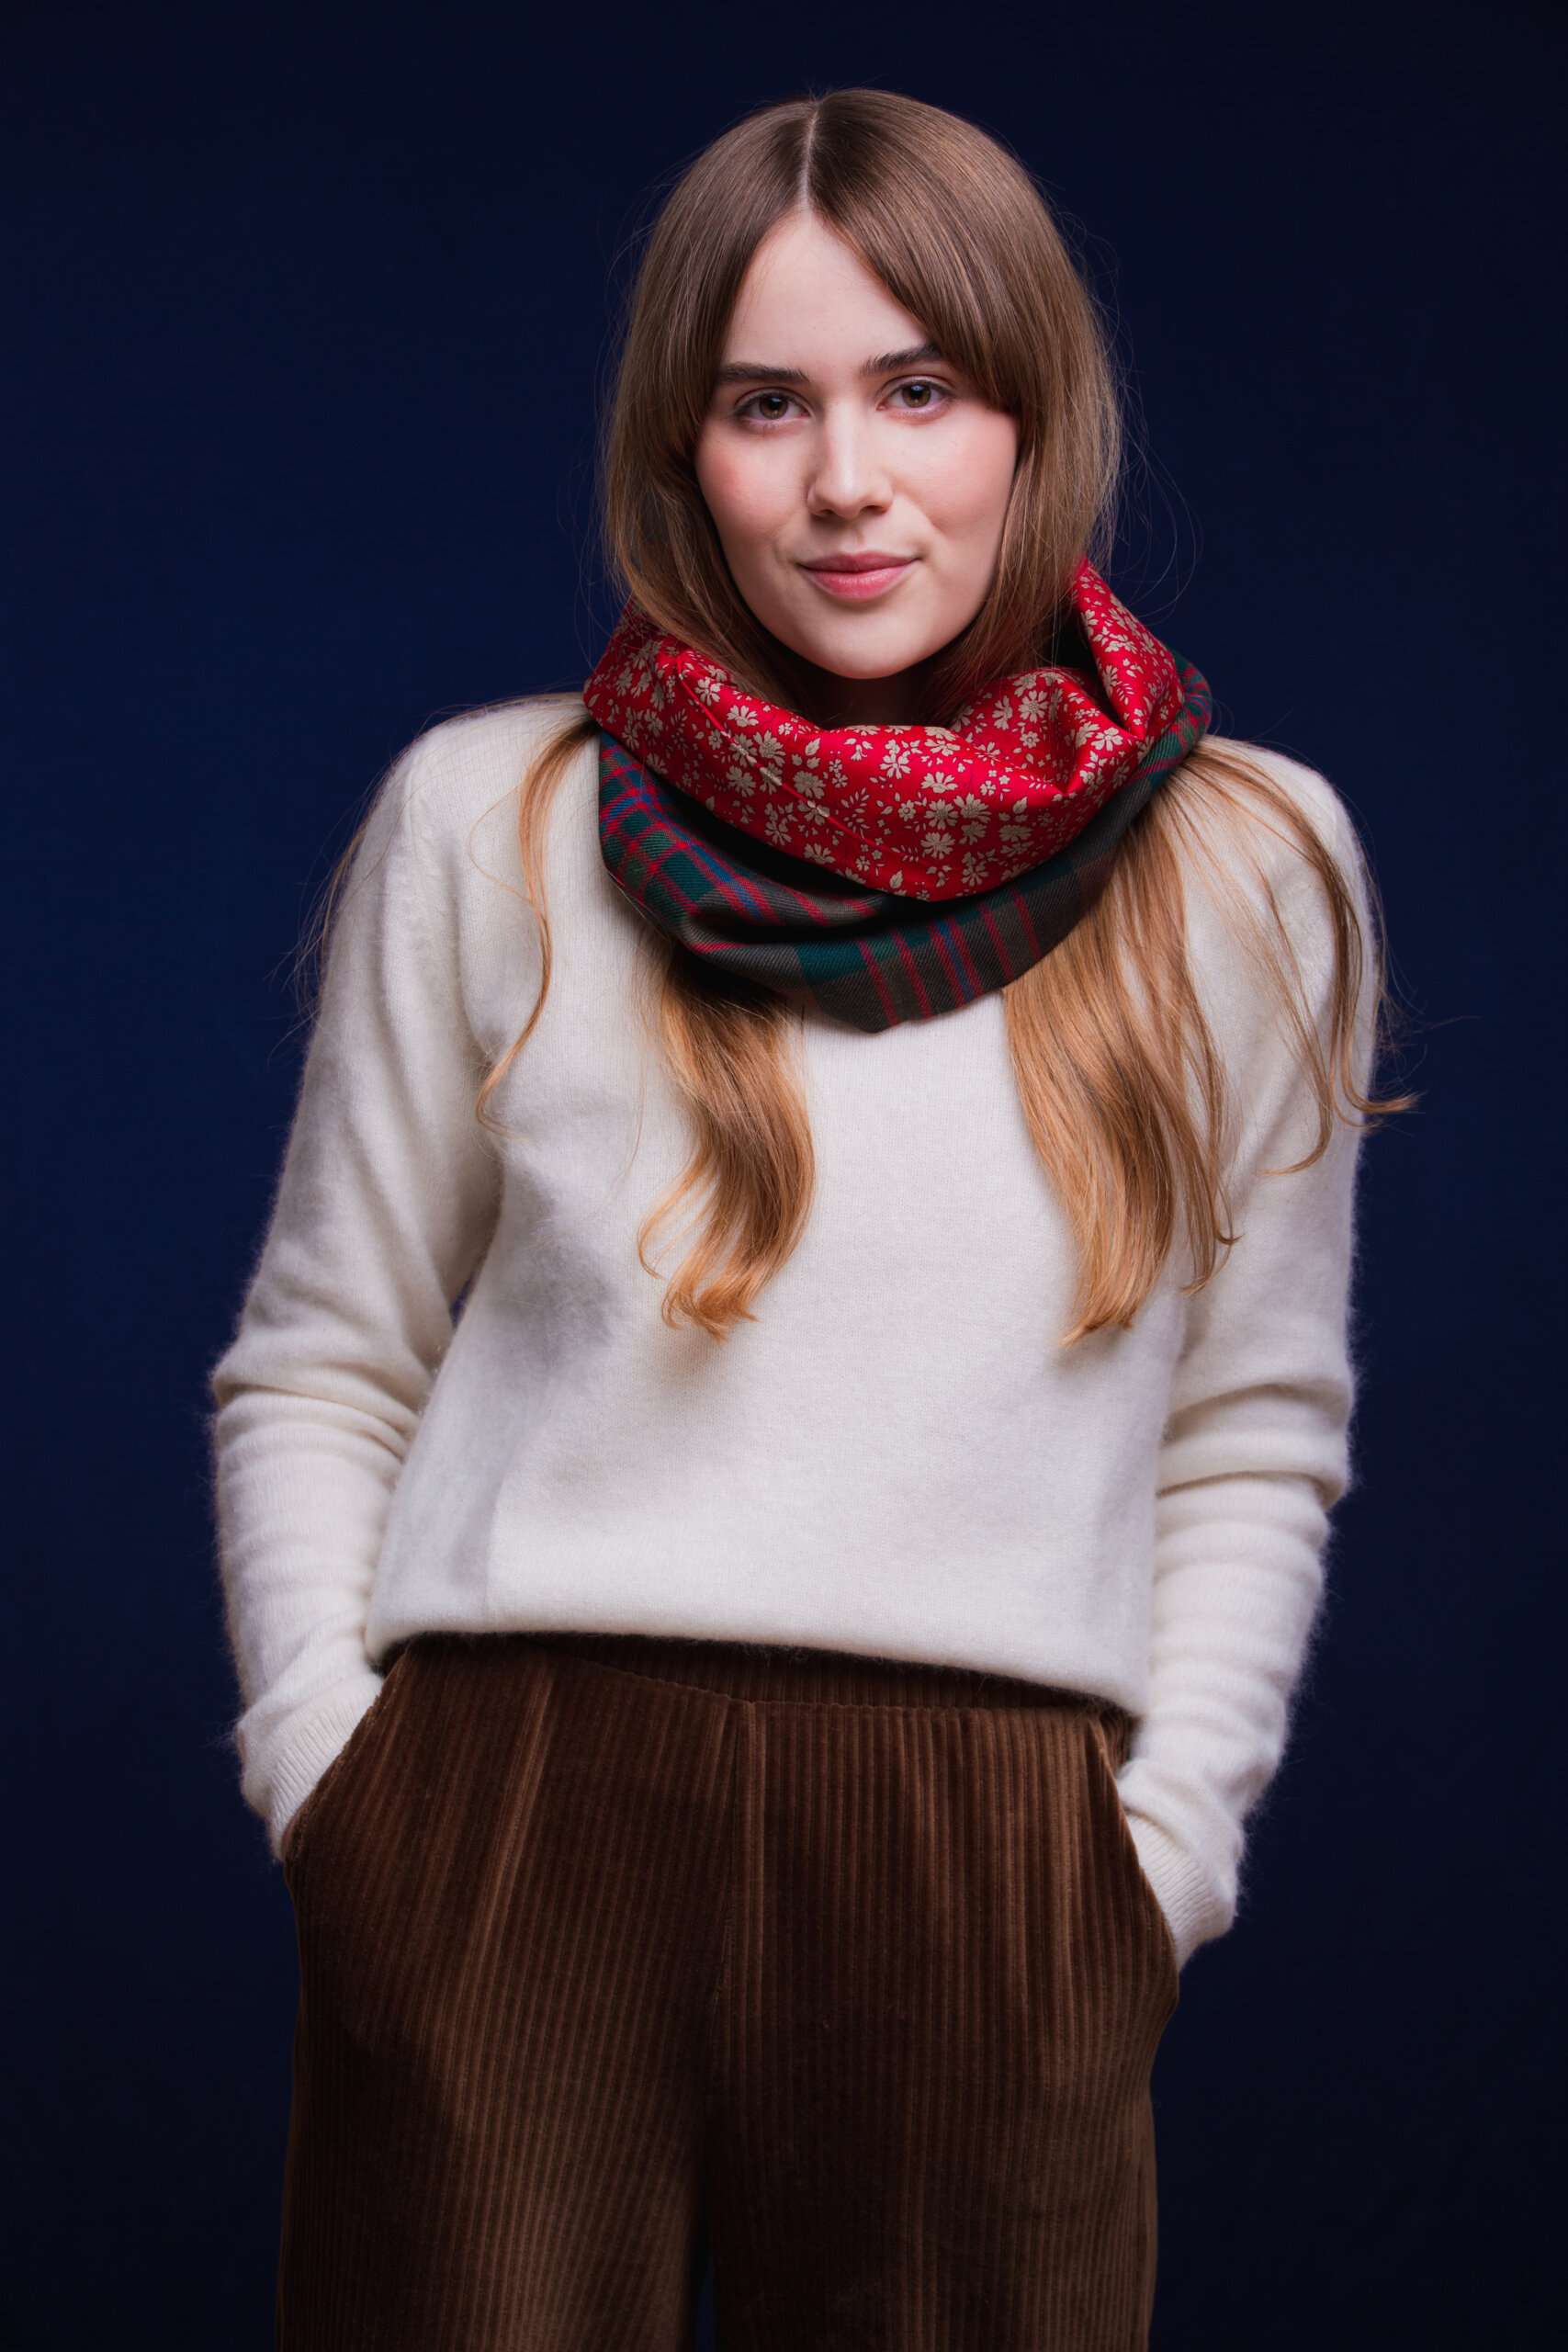 LoullyMakes Studio 4 52 scaled Classic Cowl in our own exclusive John Muir Way Tartan with Liberty Print tana lawn cotton lining. Simply select your choice of coloured lining from the drop-down menu. ( The example cowl pictured here features lining 5 ) This easy-to-wear cowl combines effortless styling and sublime warmth, being formed from a simple superfine cotton lined "tube" of 100% wool John Muir Way Tartan. Simply pop over your head and wear the cowl high, to keep out the chill, or roll over the neckline to feature a flourish of an iconic art fabric. 100% Wool Tartan, 100% cotton lining